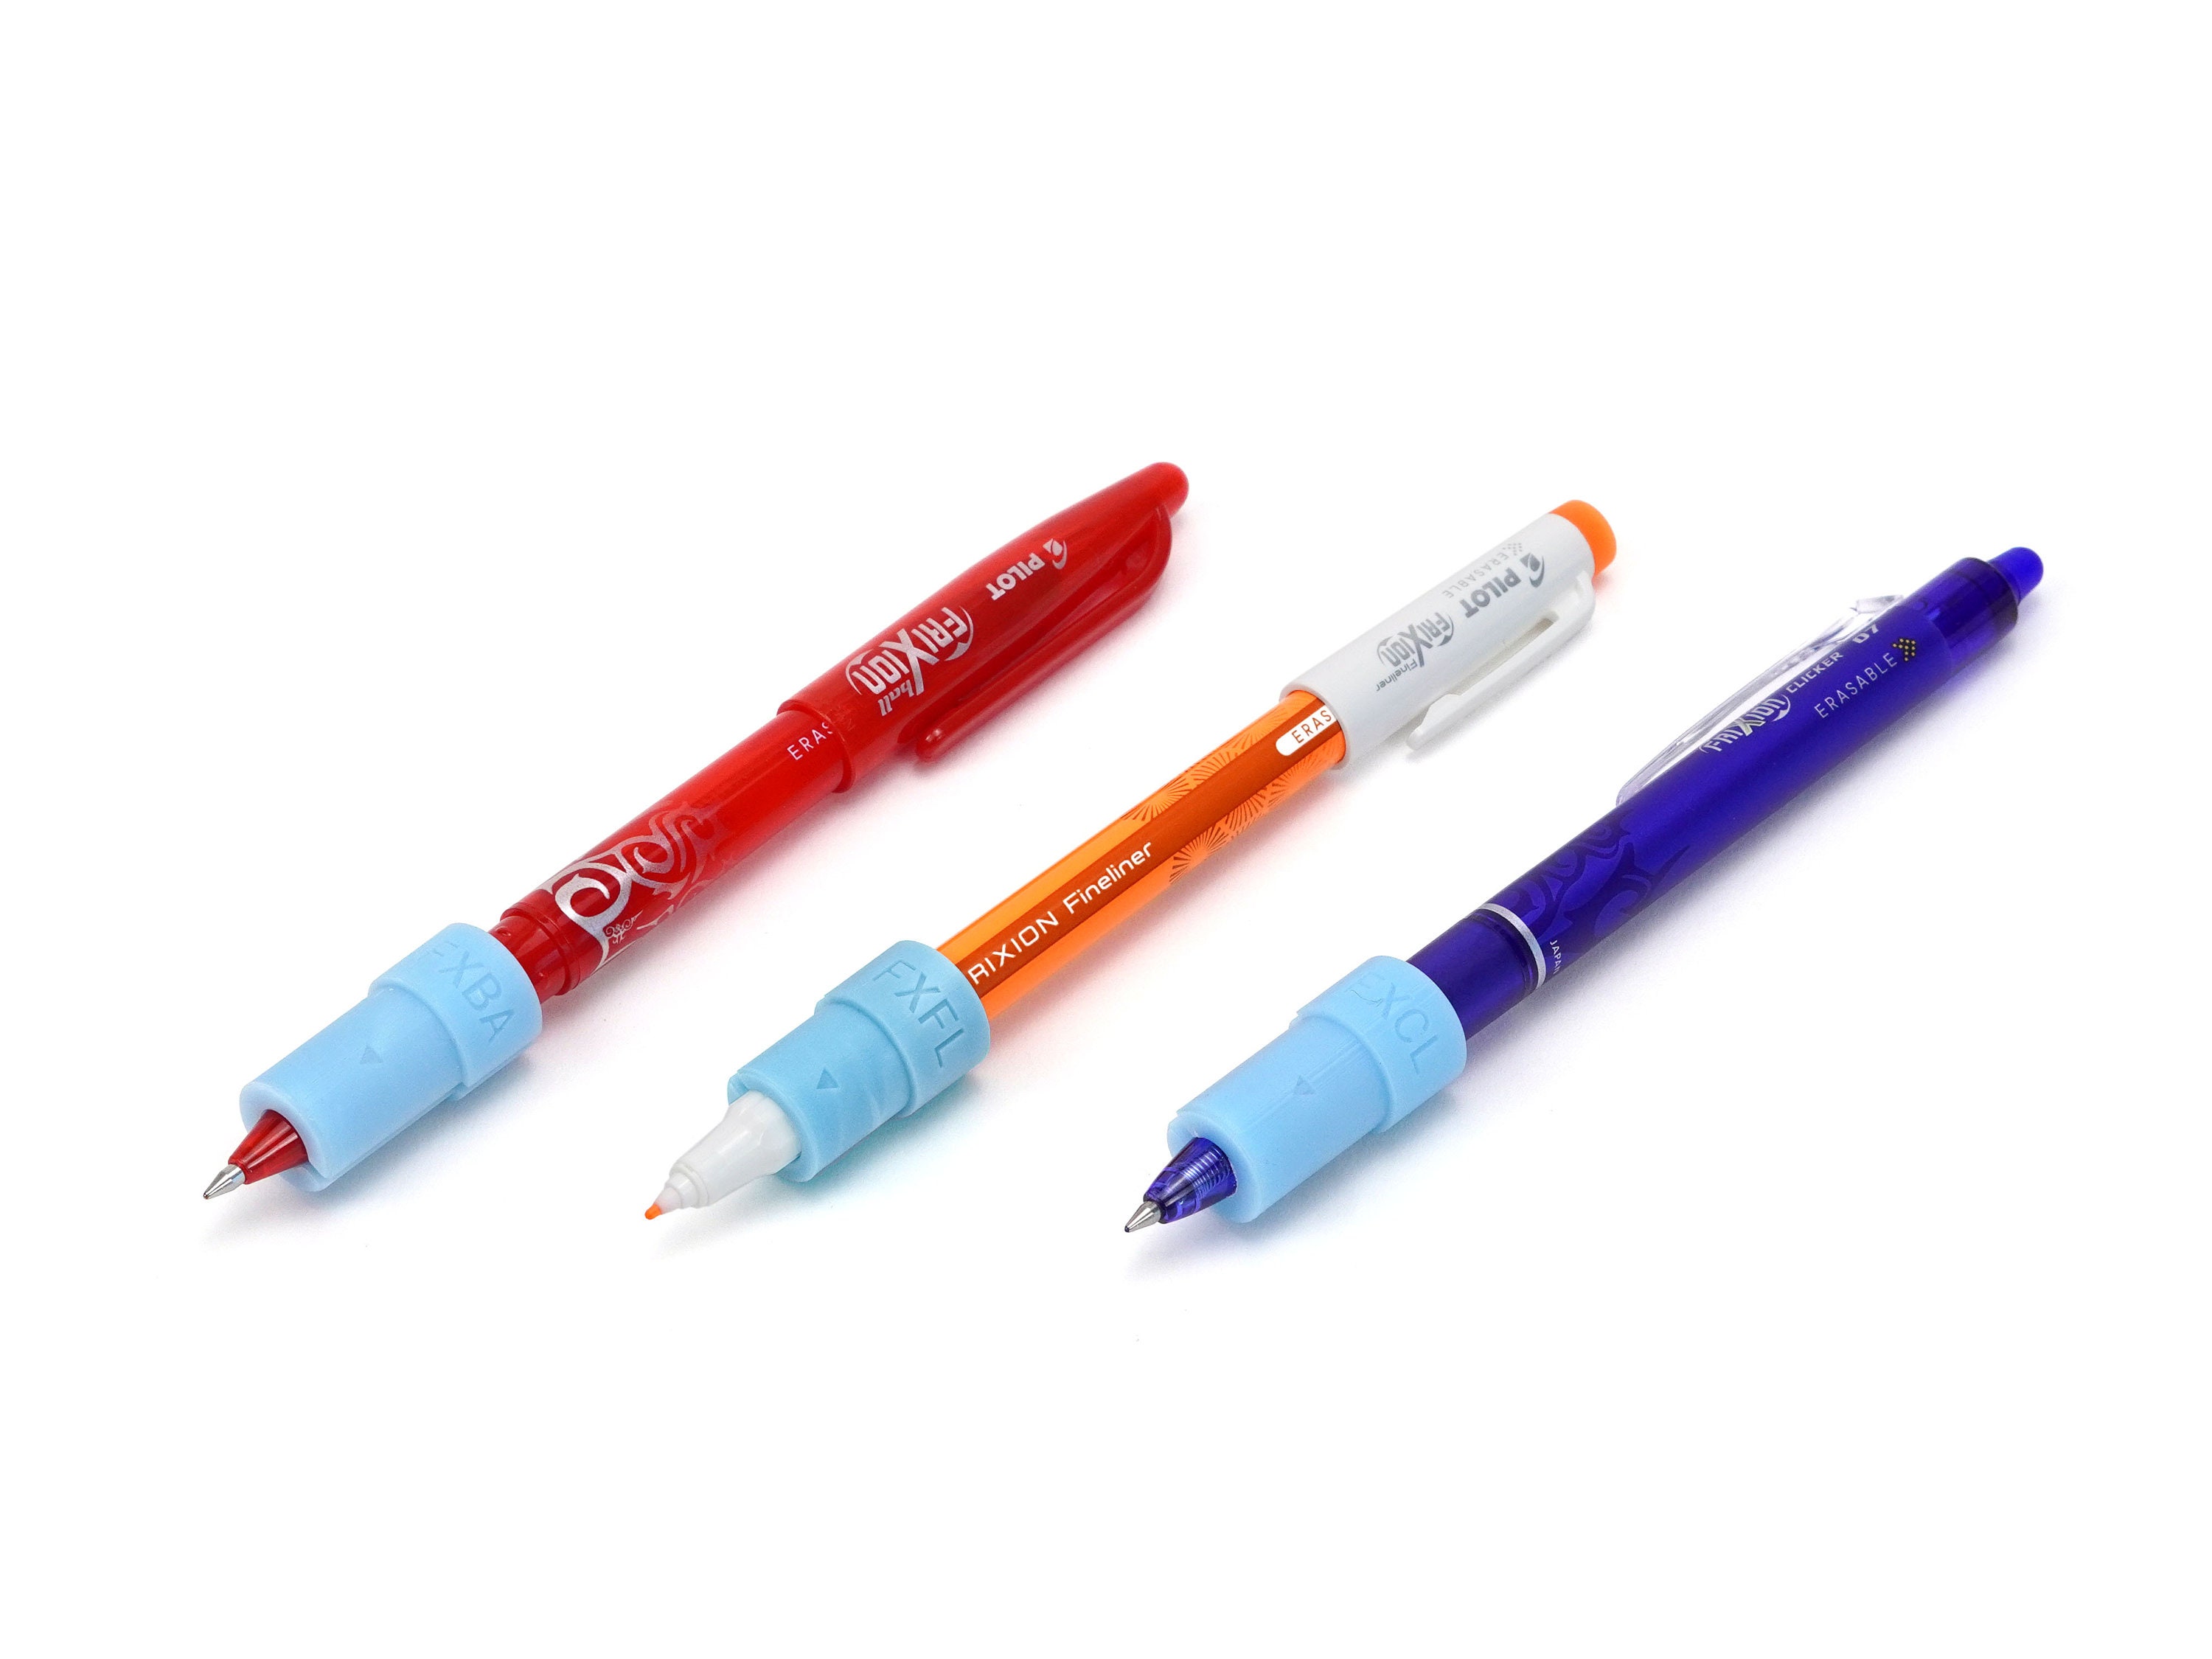 Frixion Pen, Hand Embroidery Transfer Pen, Erasable Pen, Pilot Frixion Pen,  Frixion Erasable Pen -  Ireland